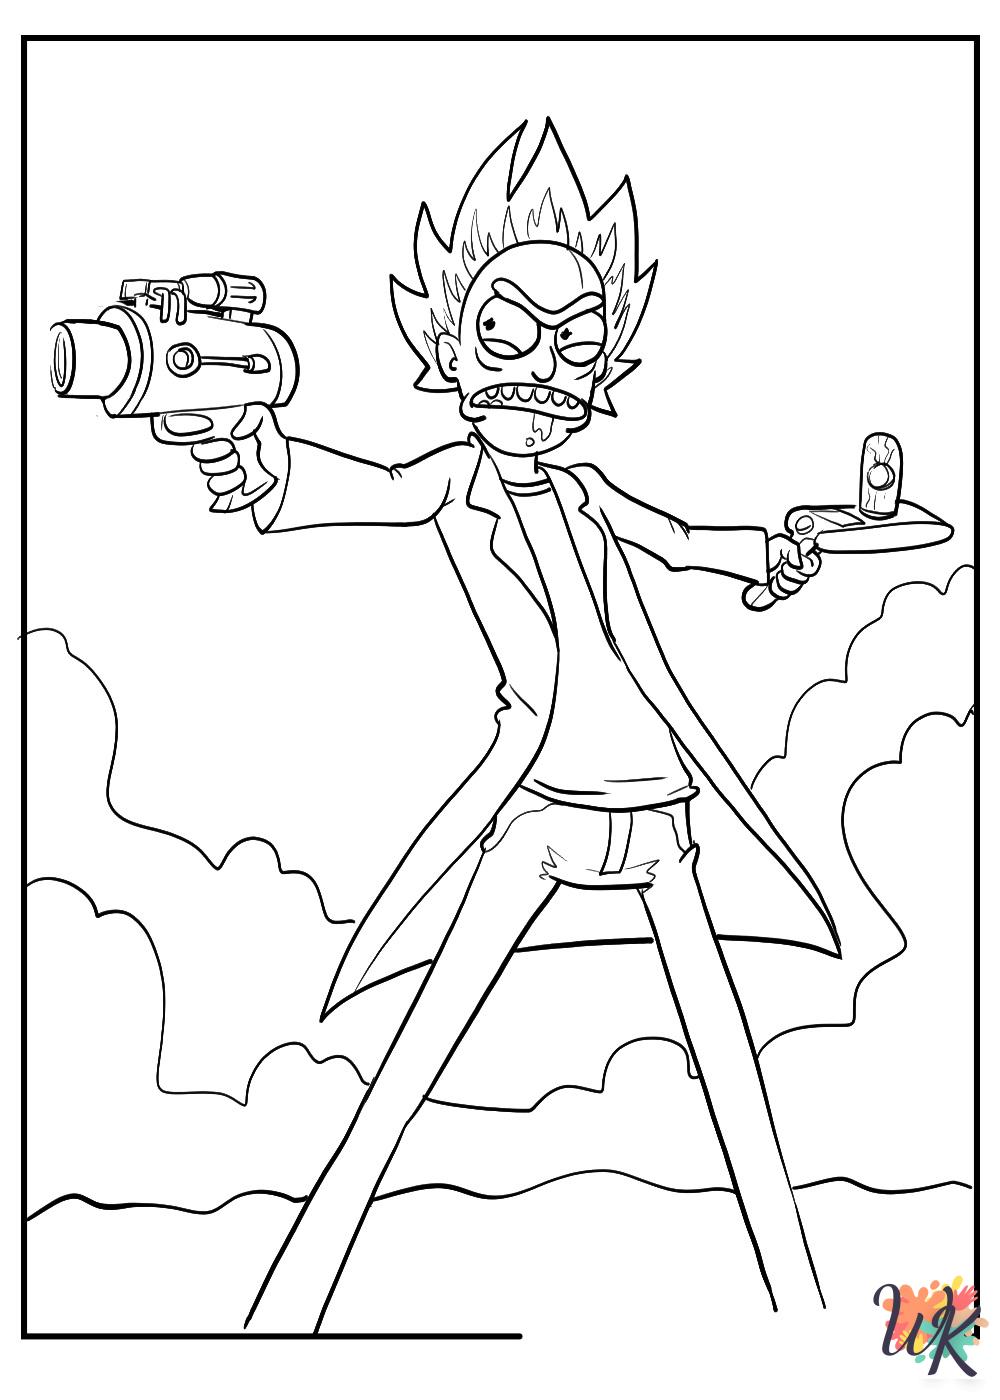 coloring pages for kids Rick and Morty 1